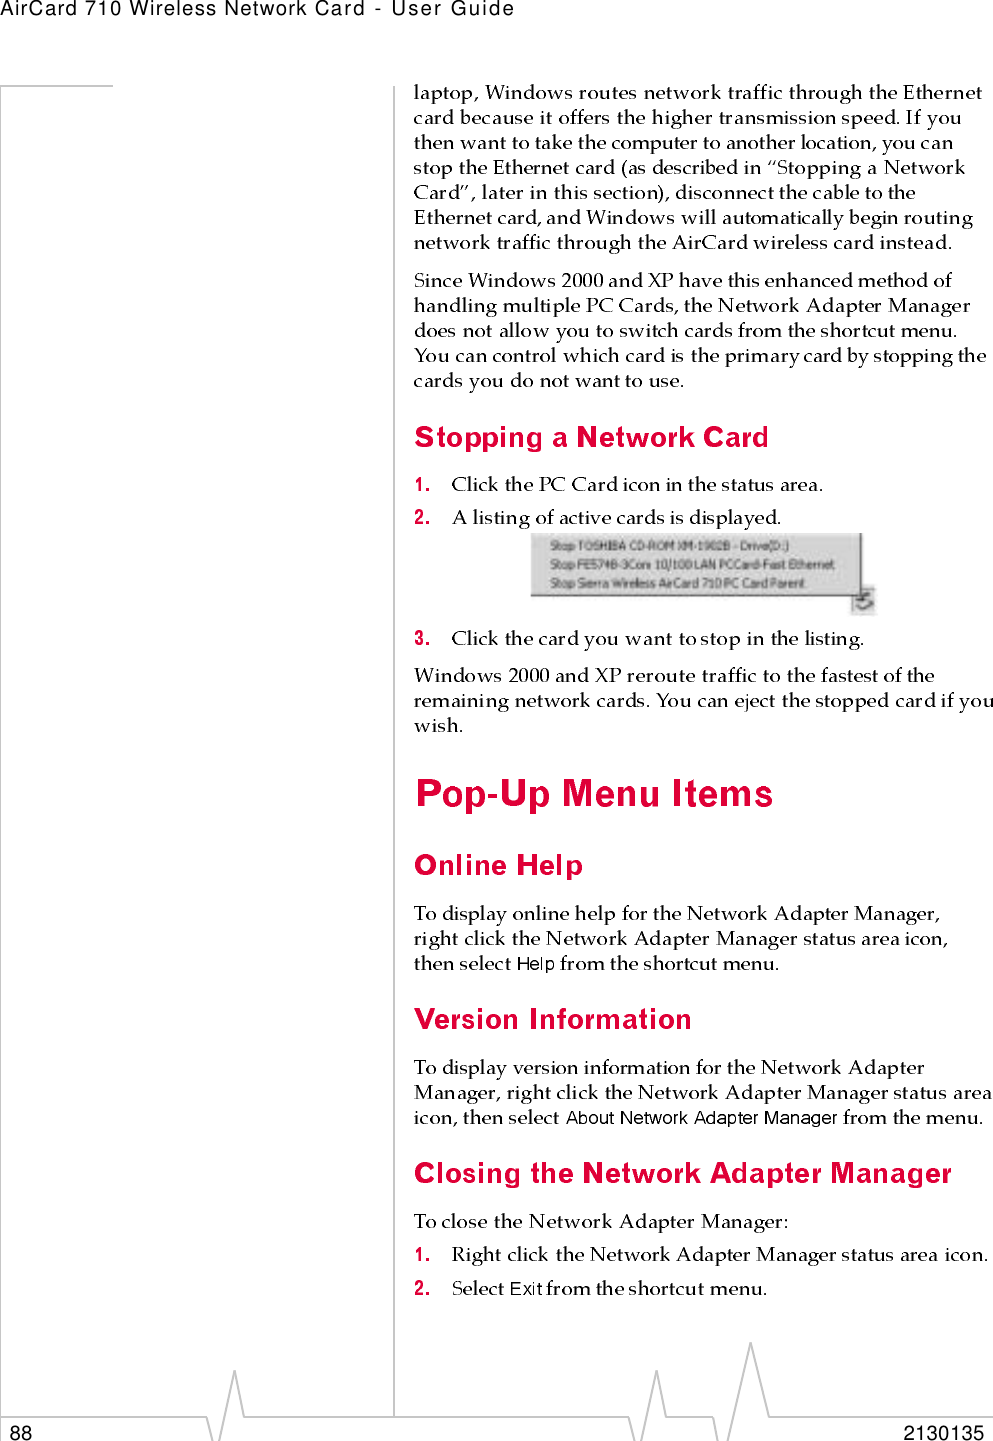 AirCard 710 Wireless Network Card - User Guide88 2130135